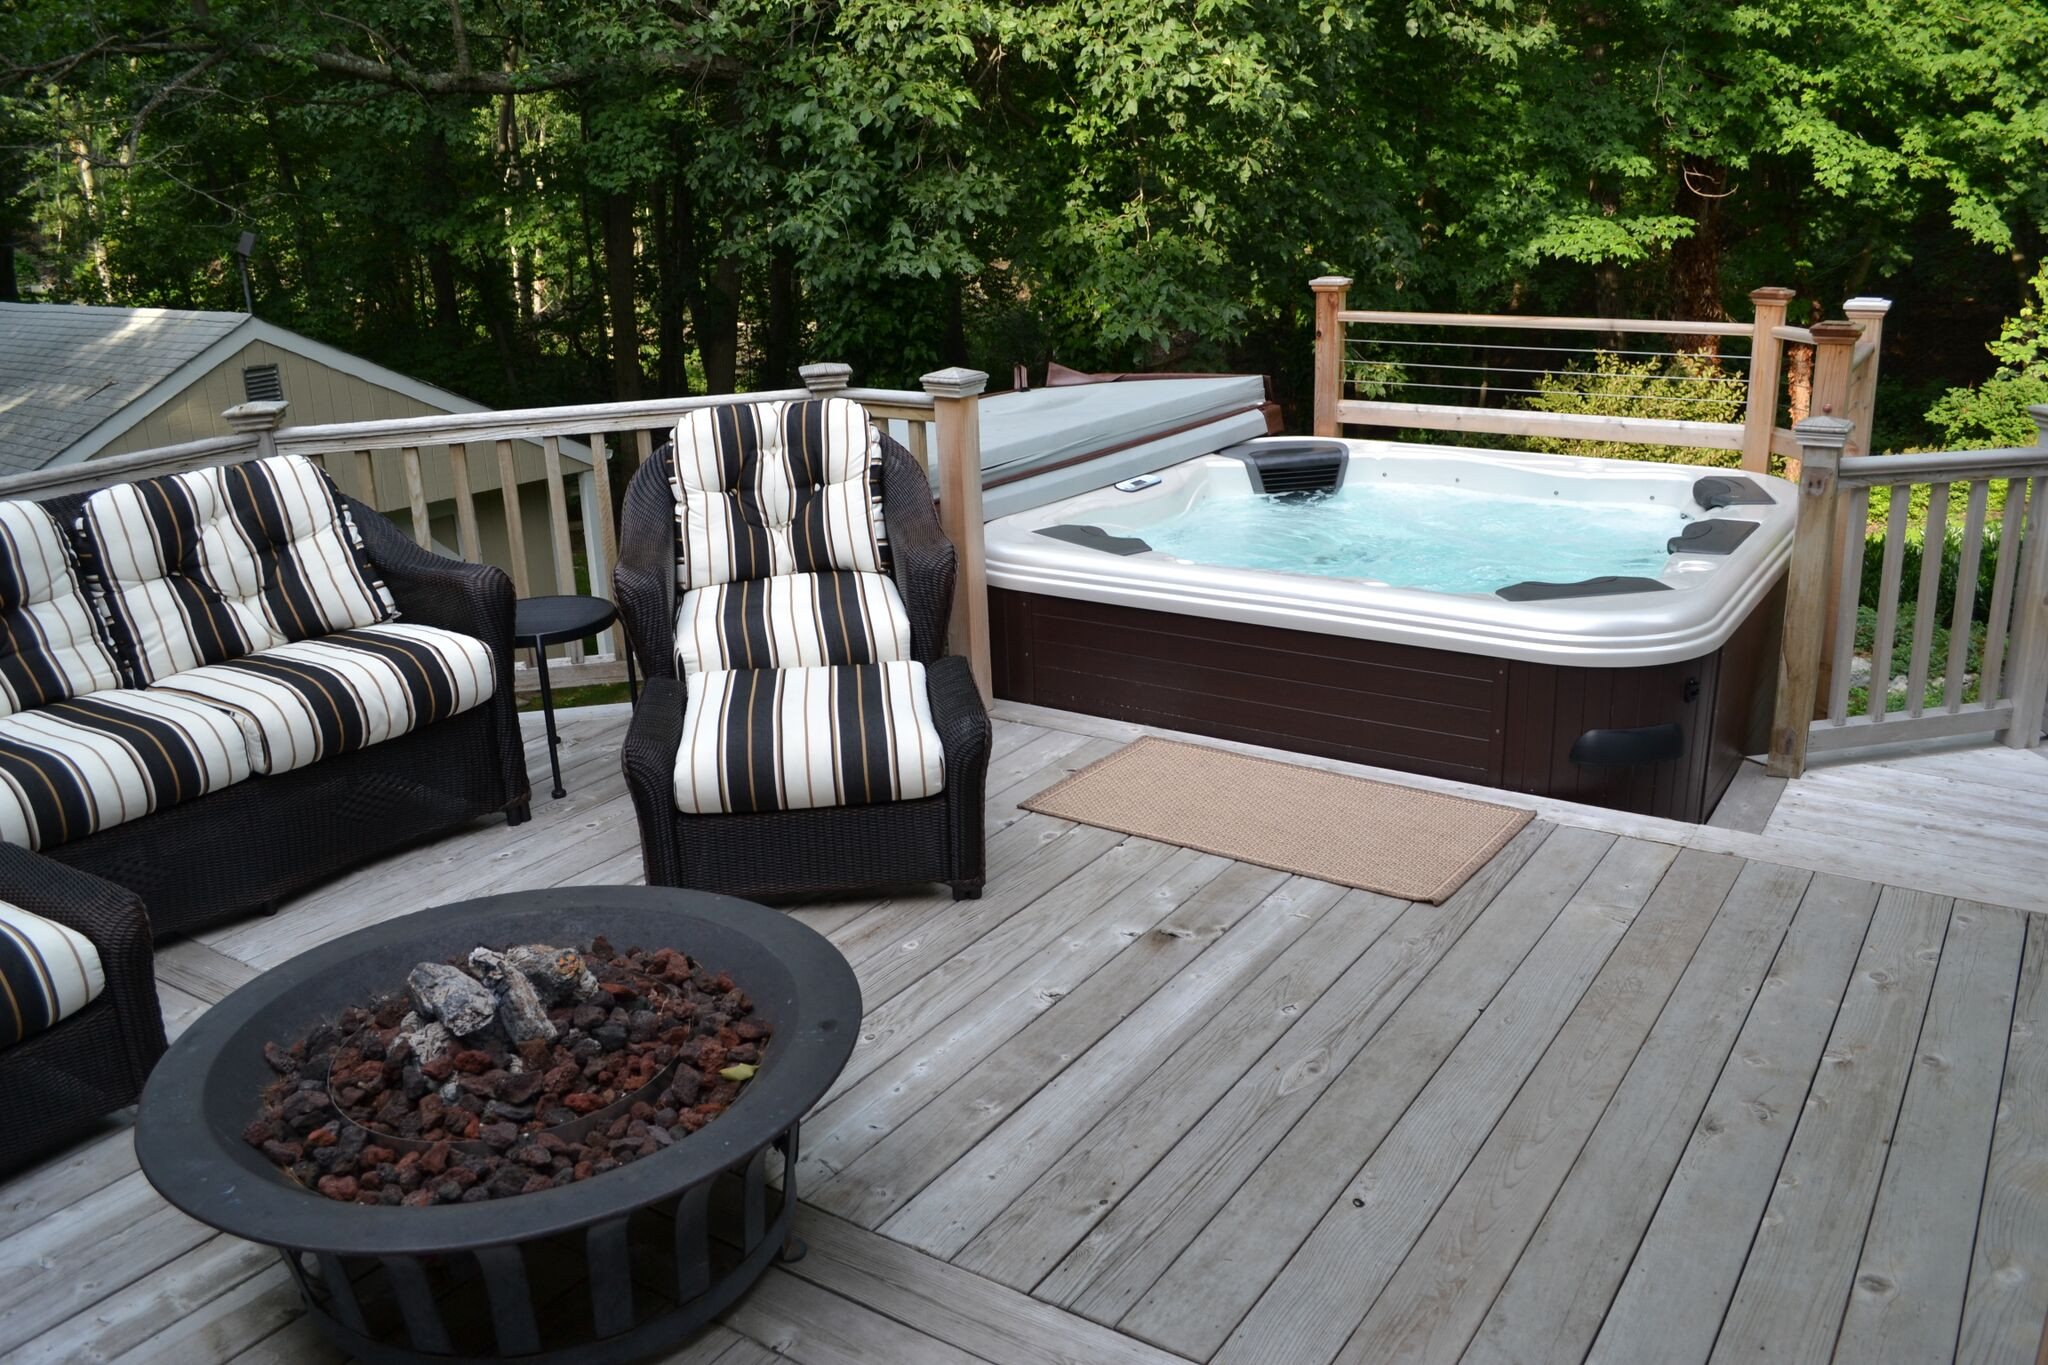 Fire Pit On Wood Deck
 wood burning fire pits – The Deck and Patio pany